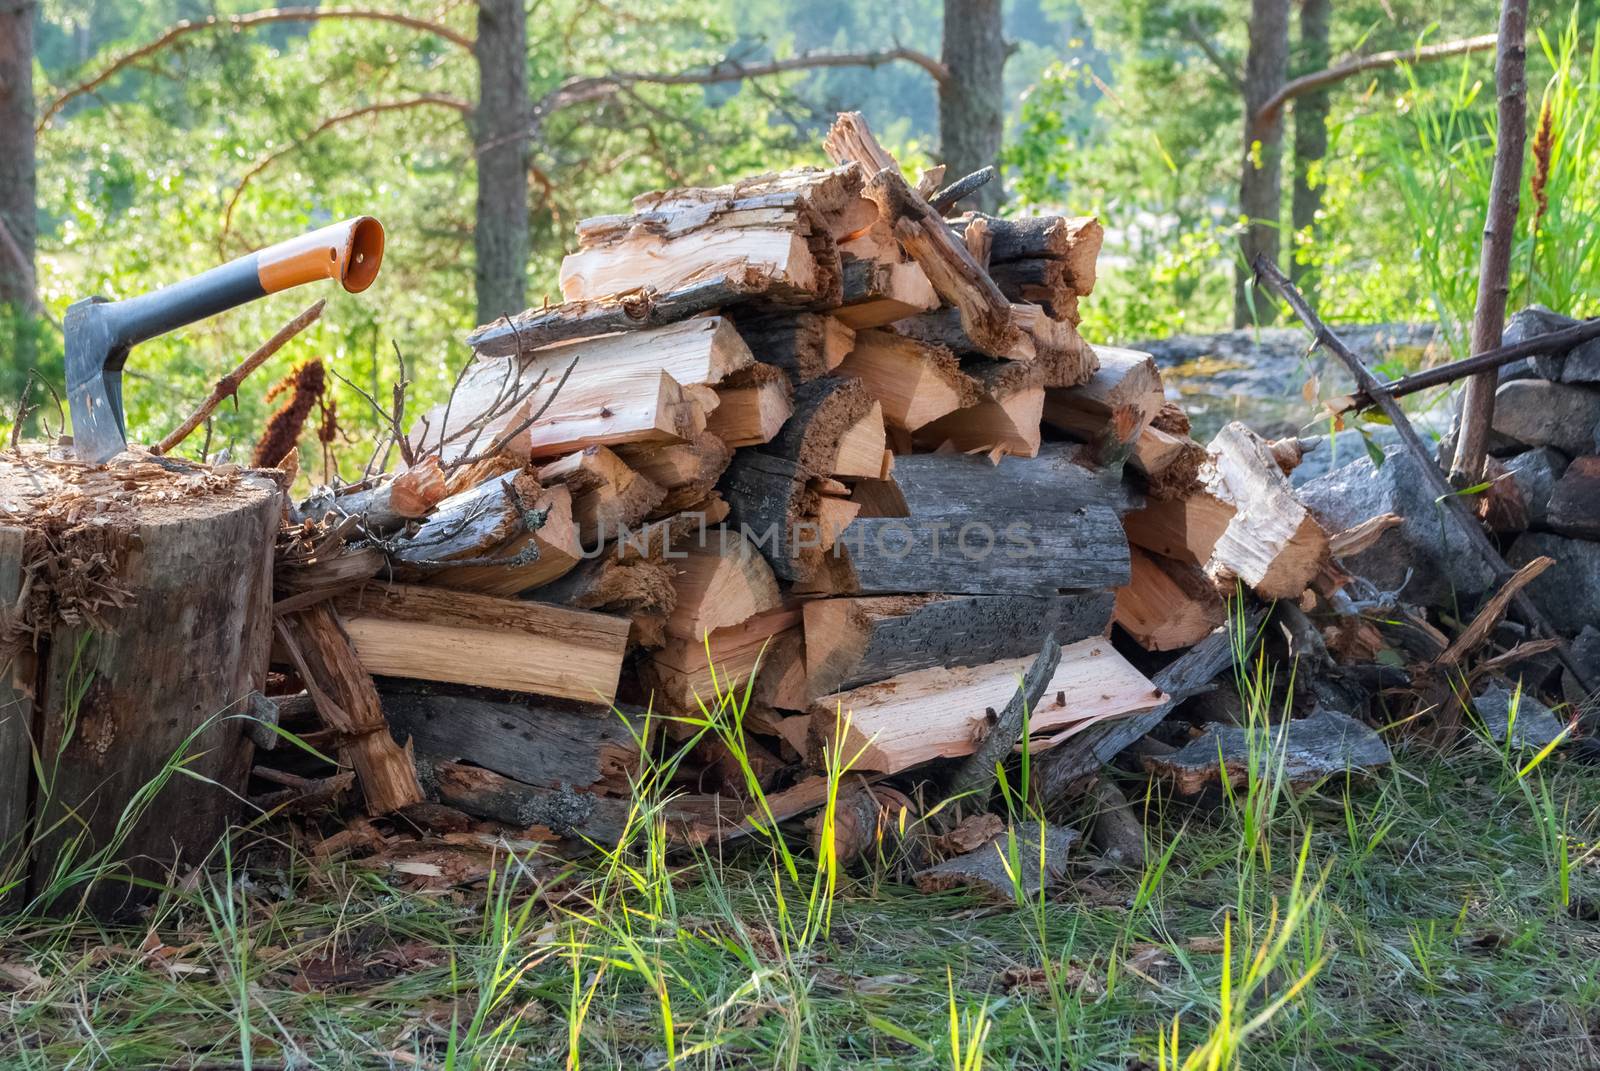 Firewood collected woodpile and ax stuck in an old stump in the Karelian forest on a bright sunny day.